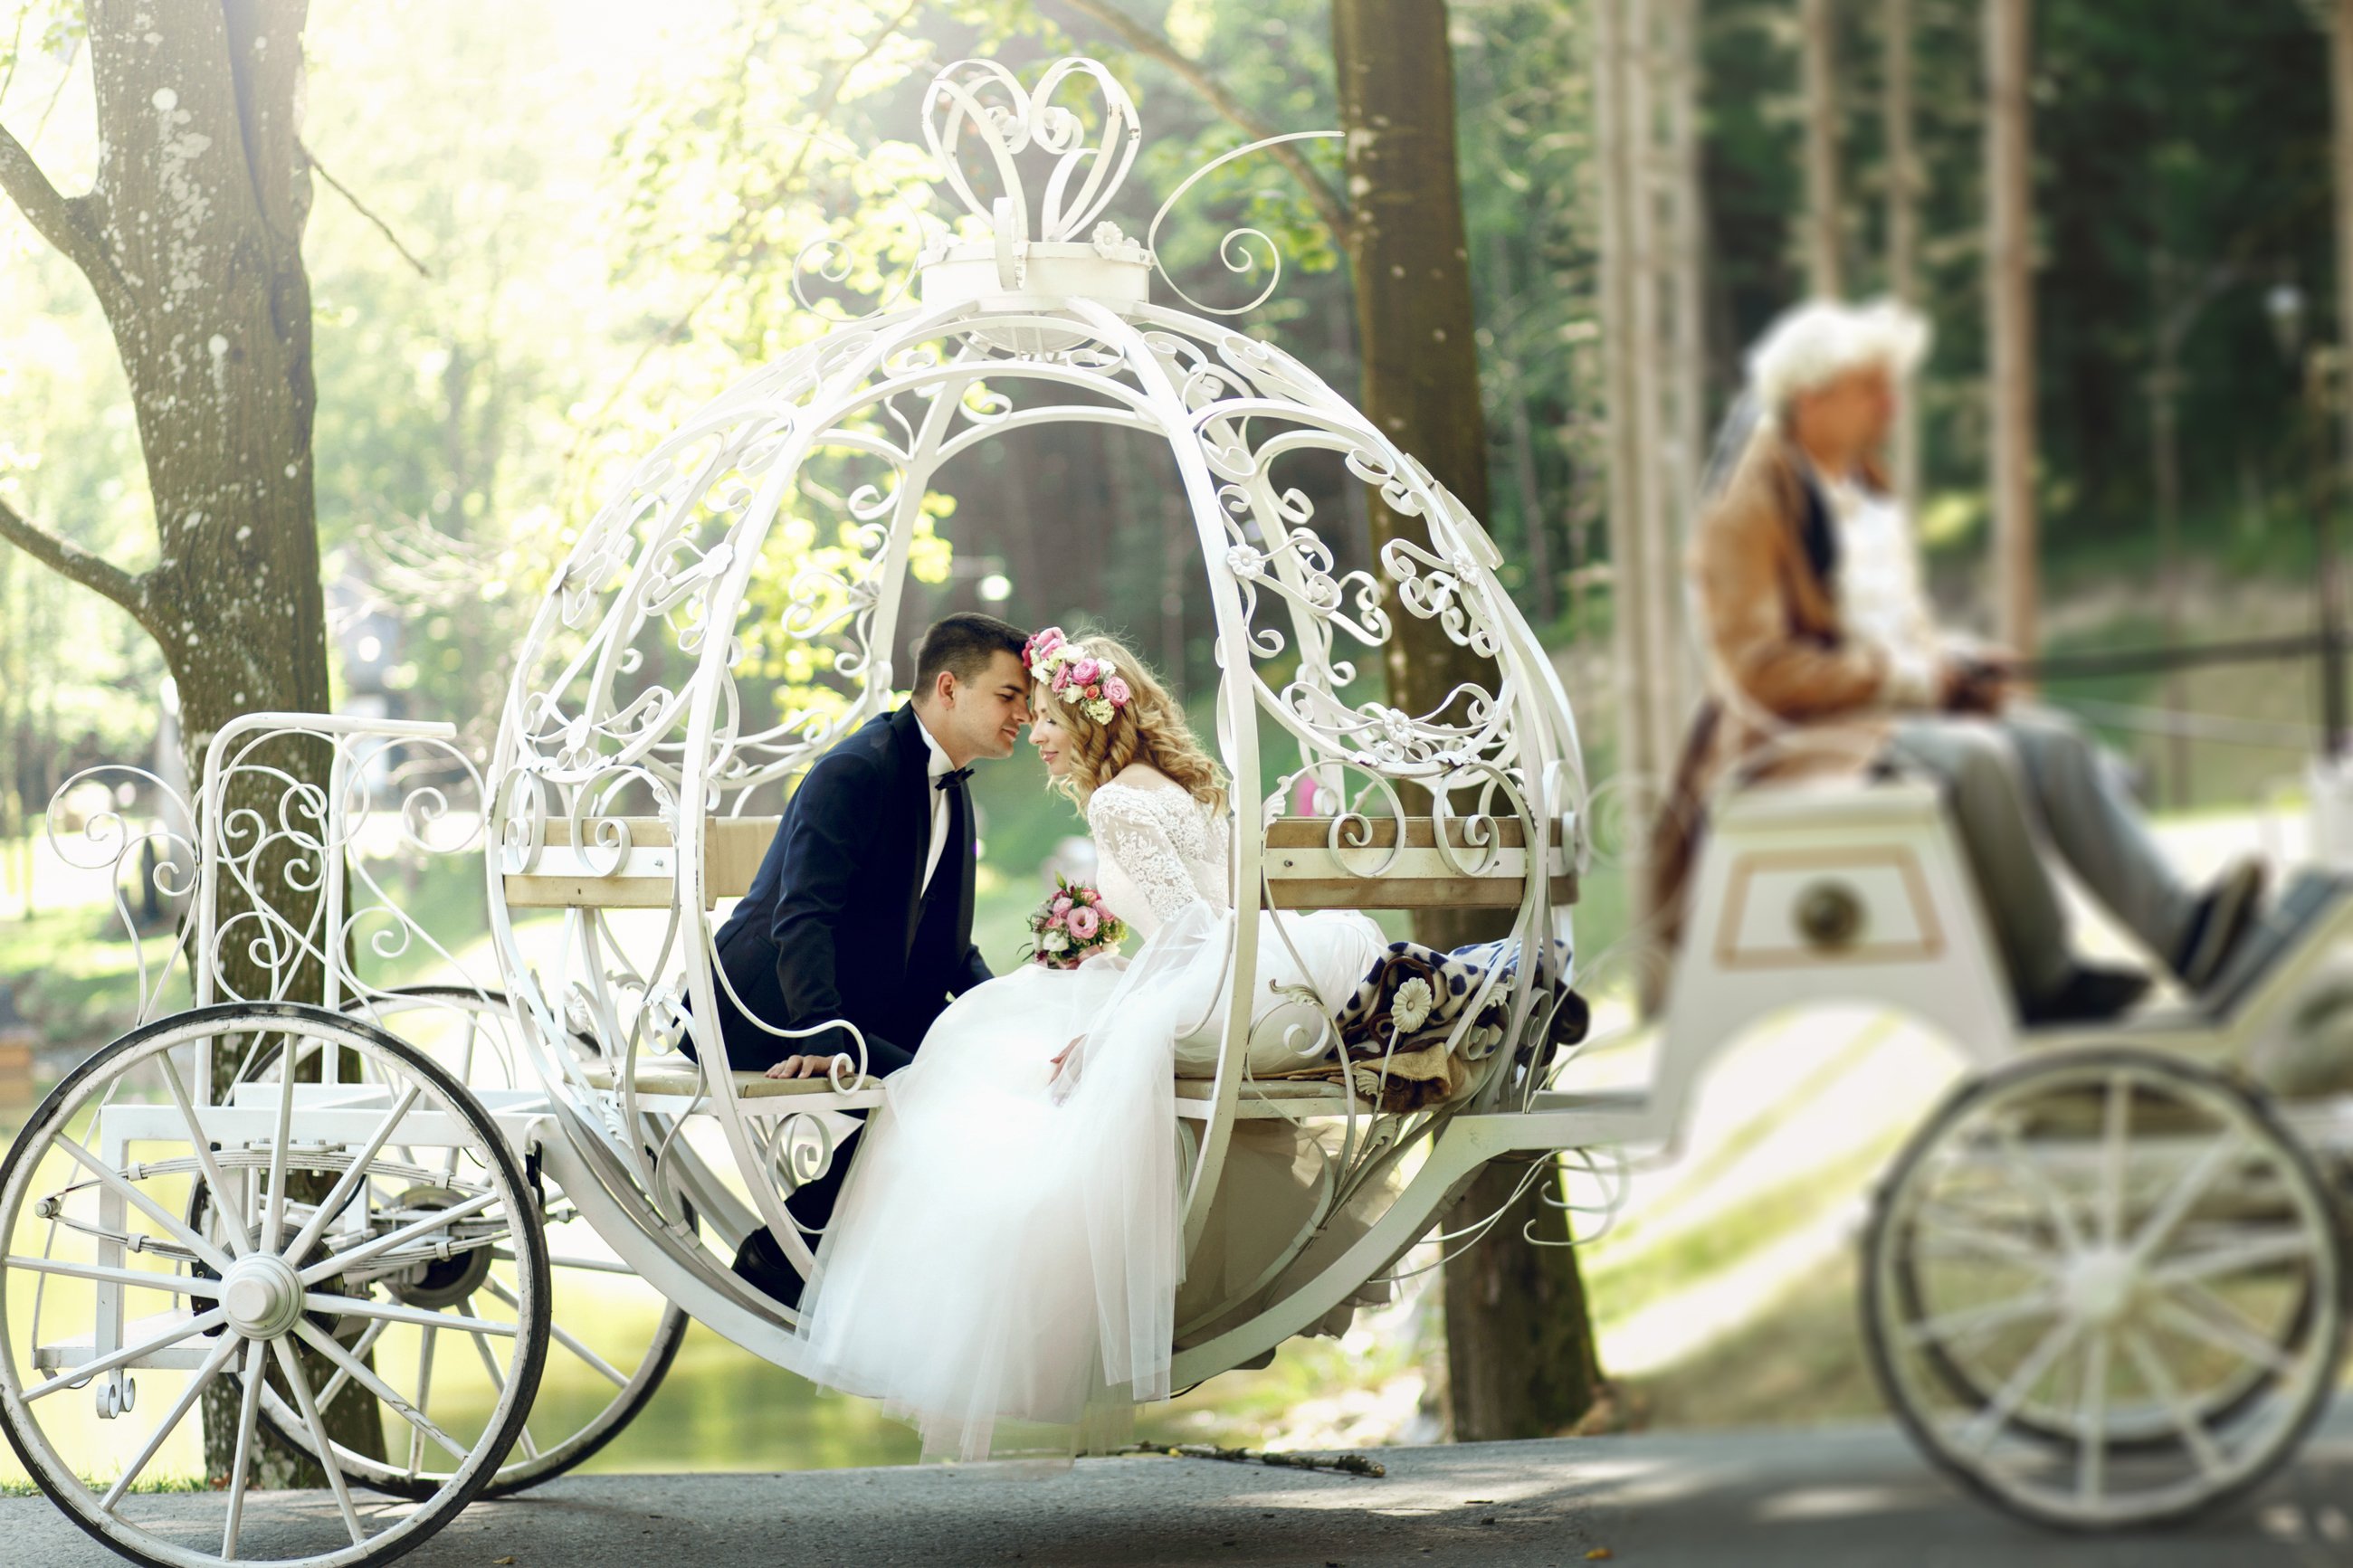 How to Pull Off Your Fairytale Wedding in Five Easy Steps